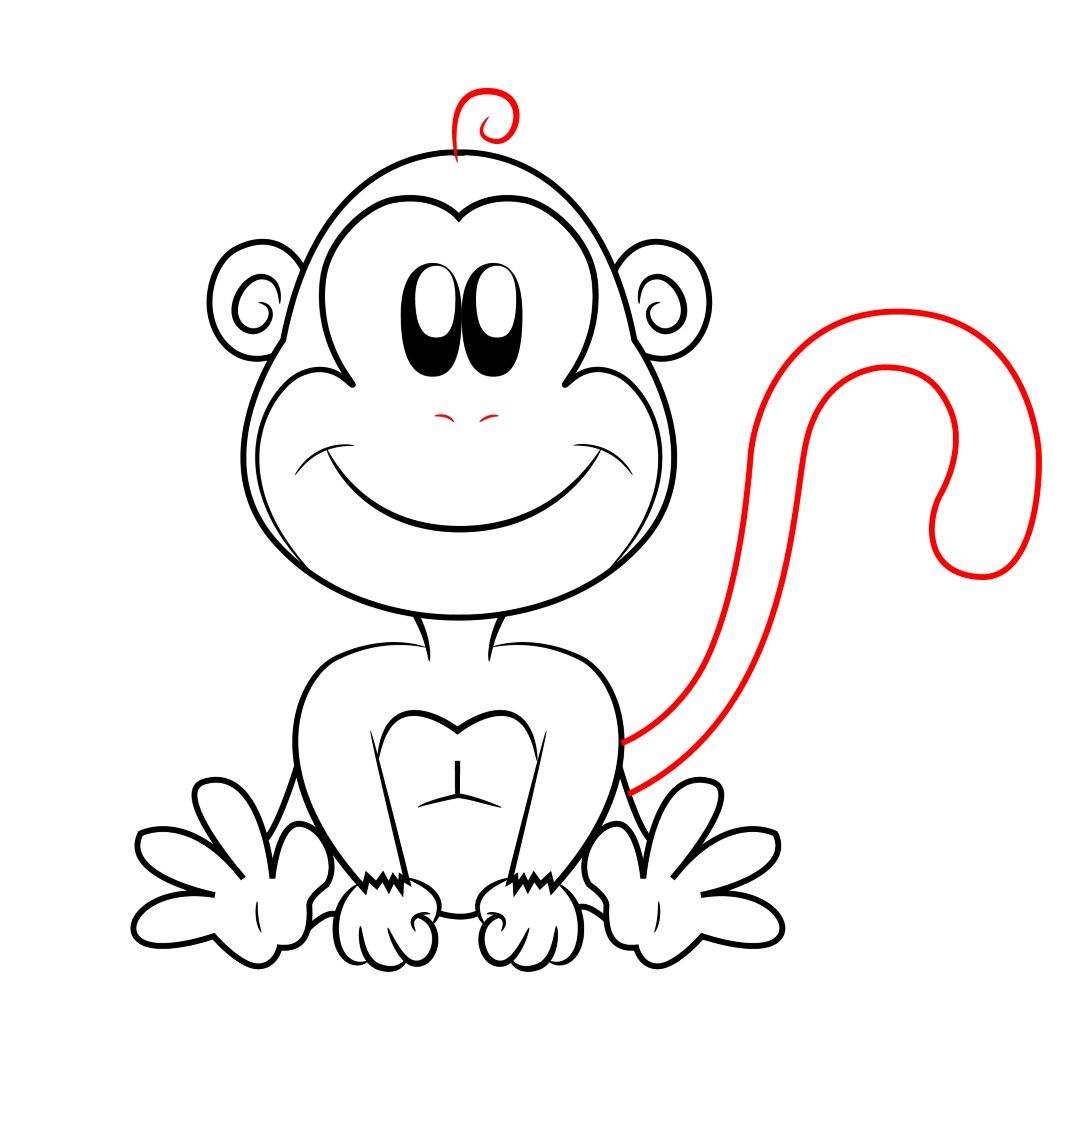 How To Draw A Monkey Step by Step  11 Easy Phase  Video